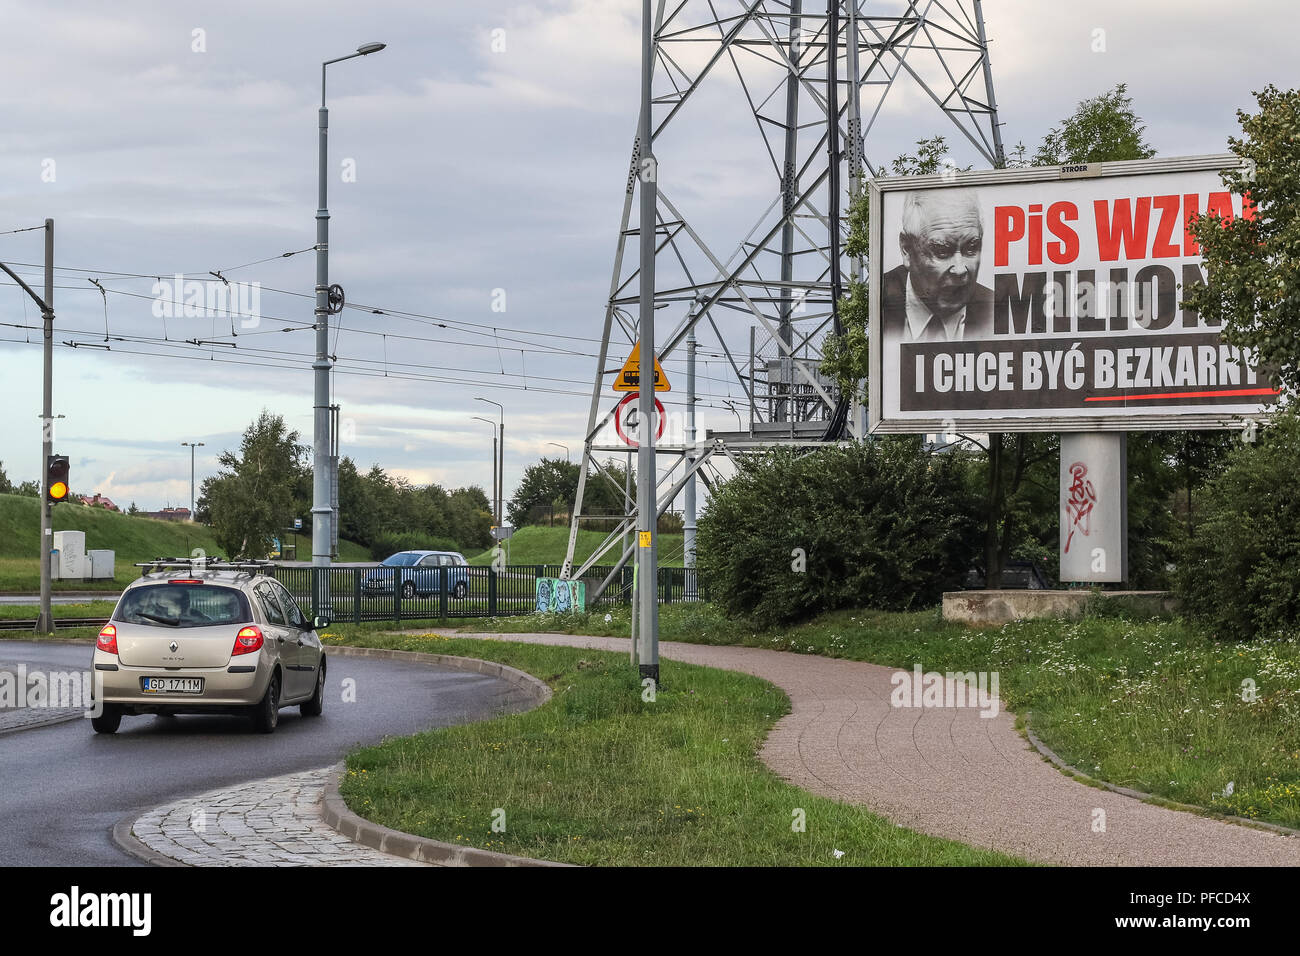 Gdansk, Poland 20th Aug. 2018 Billboard with Jaroslaw Kaczynski face and slogan ' PiS (Law and Justice) took millions, and want to be unpunished ' is seen. Posters financed by the opposition parties displayed across the country refer to giant financial benefits of people connected with the government. Local elections in Poland are scheduled for October 21st. 2018 © Vadim Pacajev / Alamy Live News Stock Photo